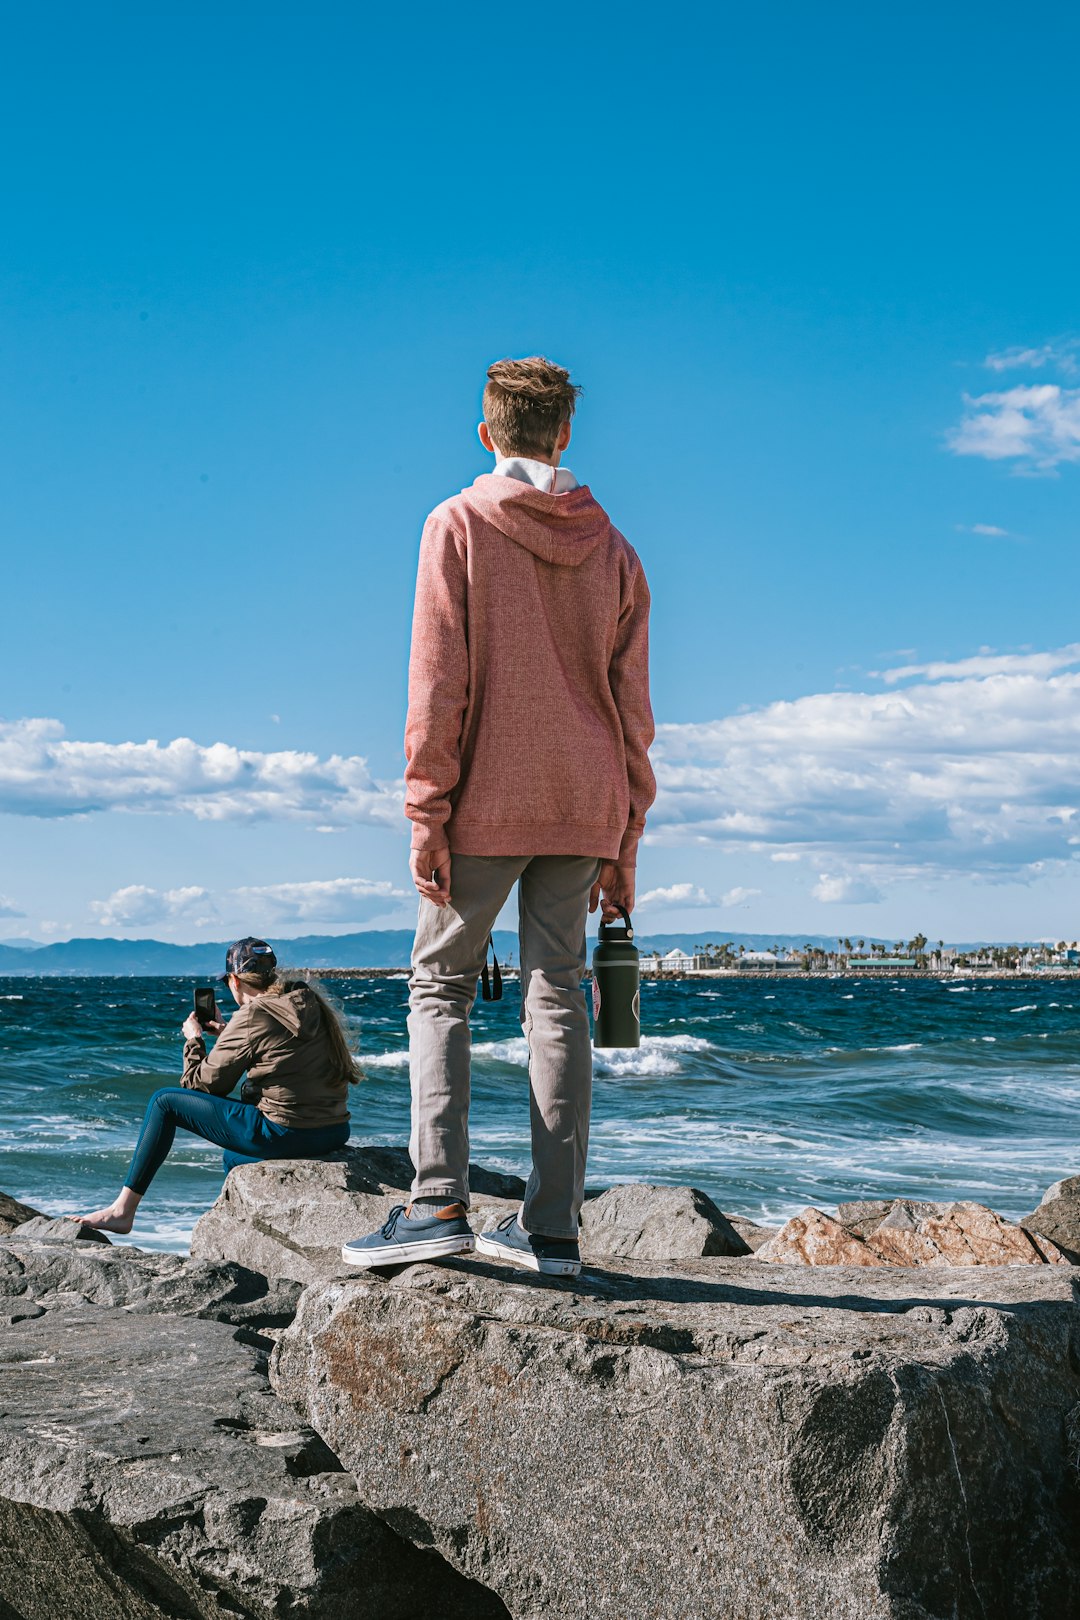 man in red sweater standing on rock near body of water during daytime